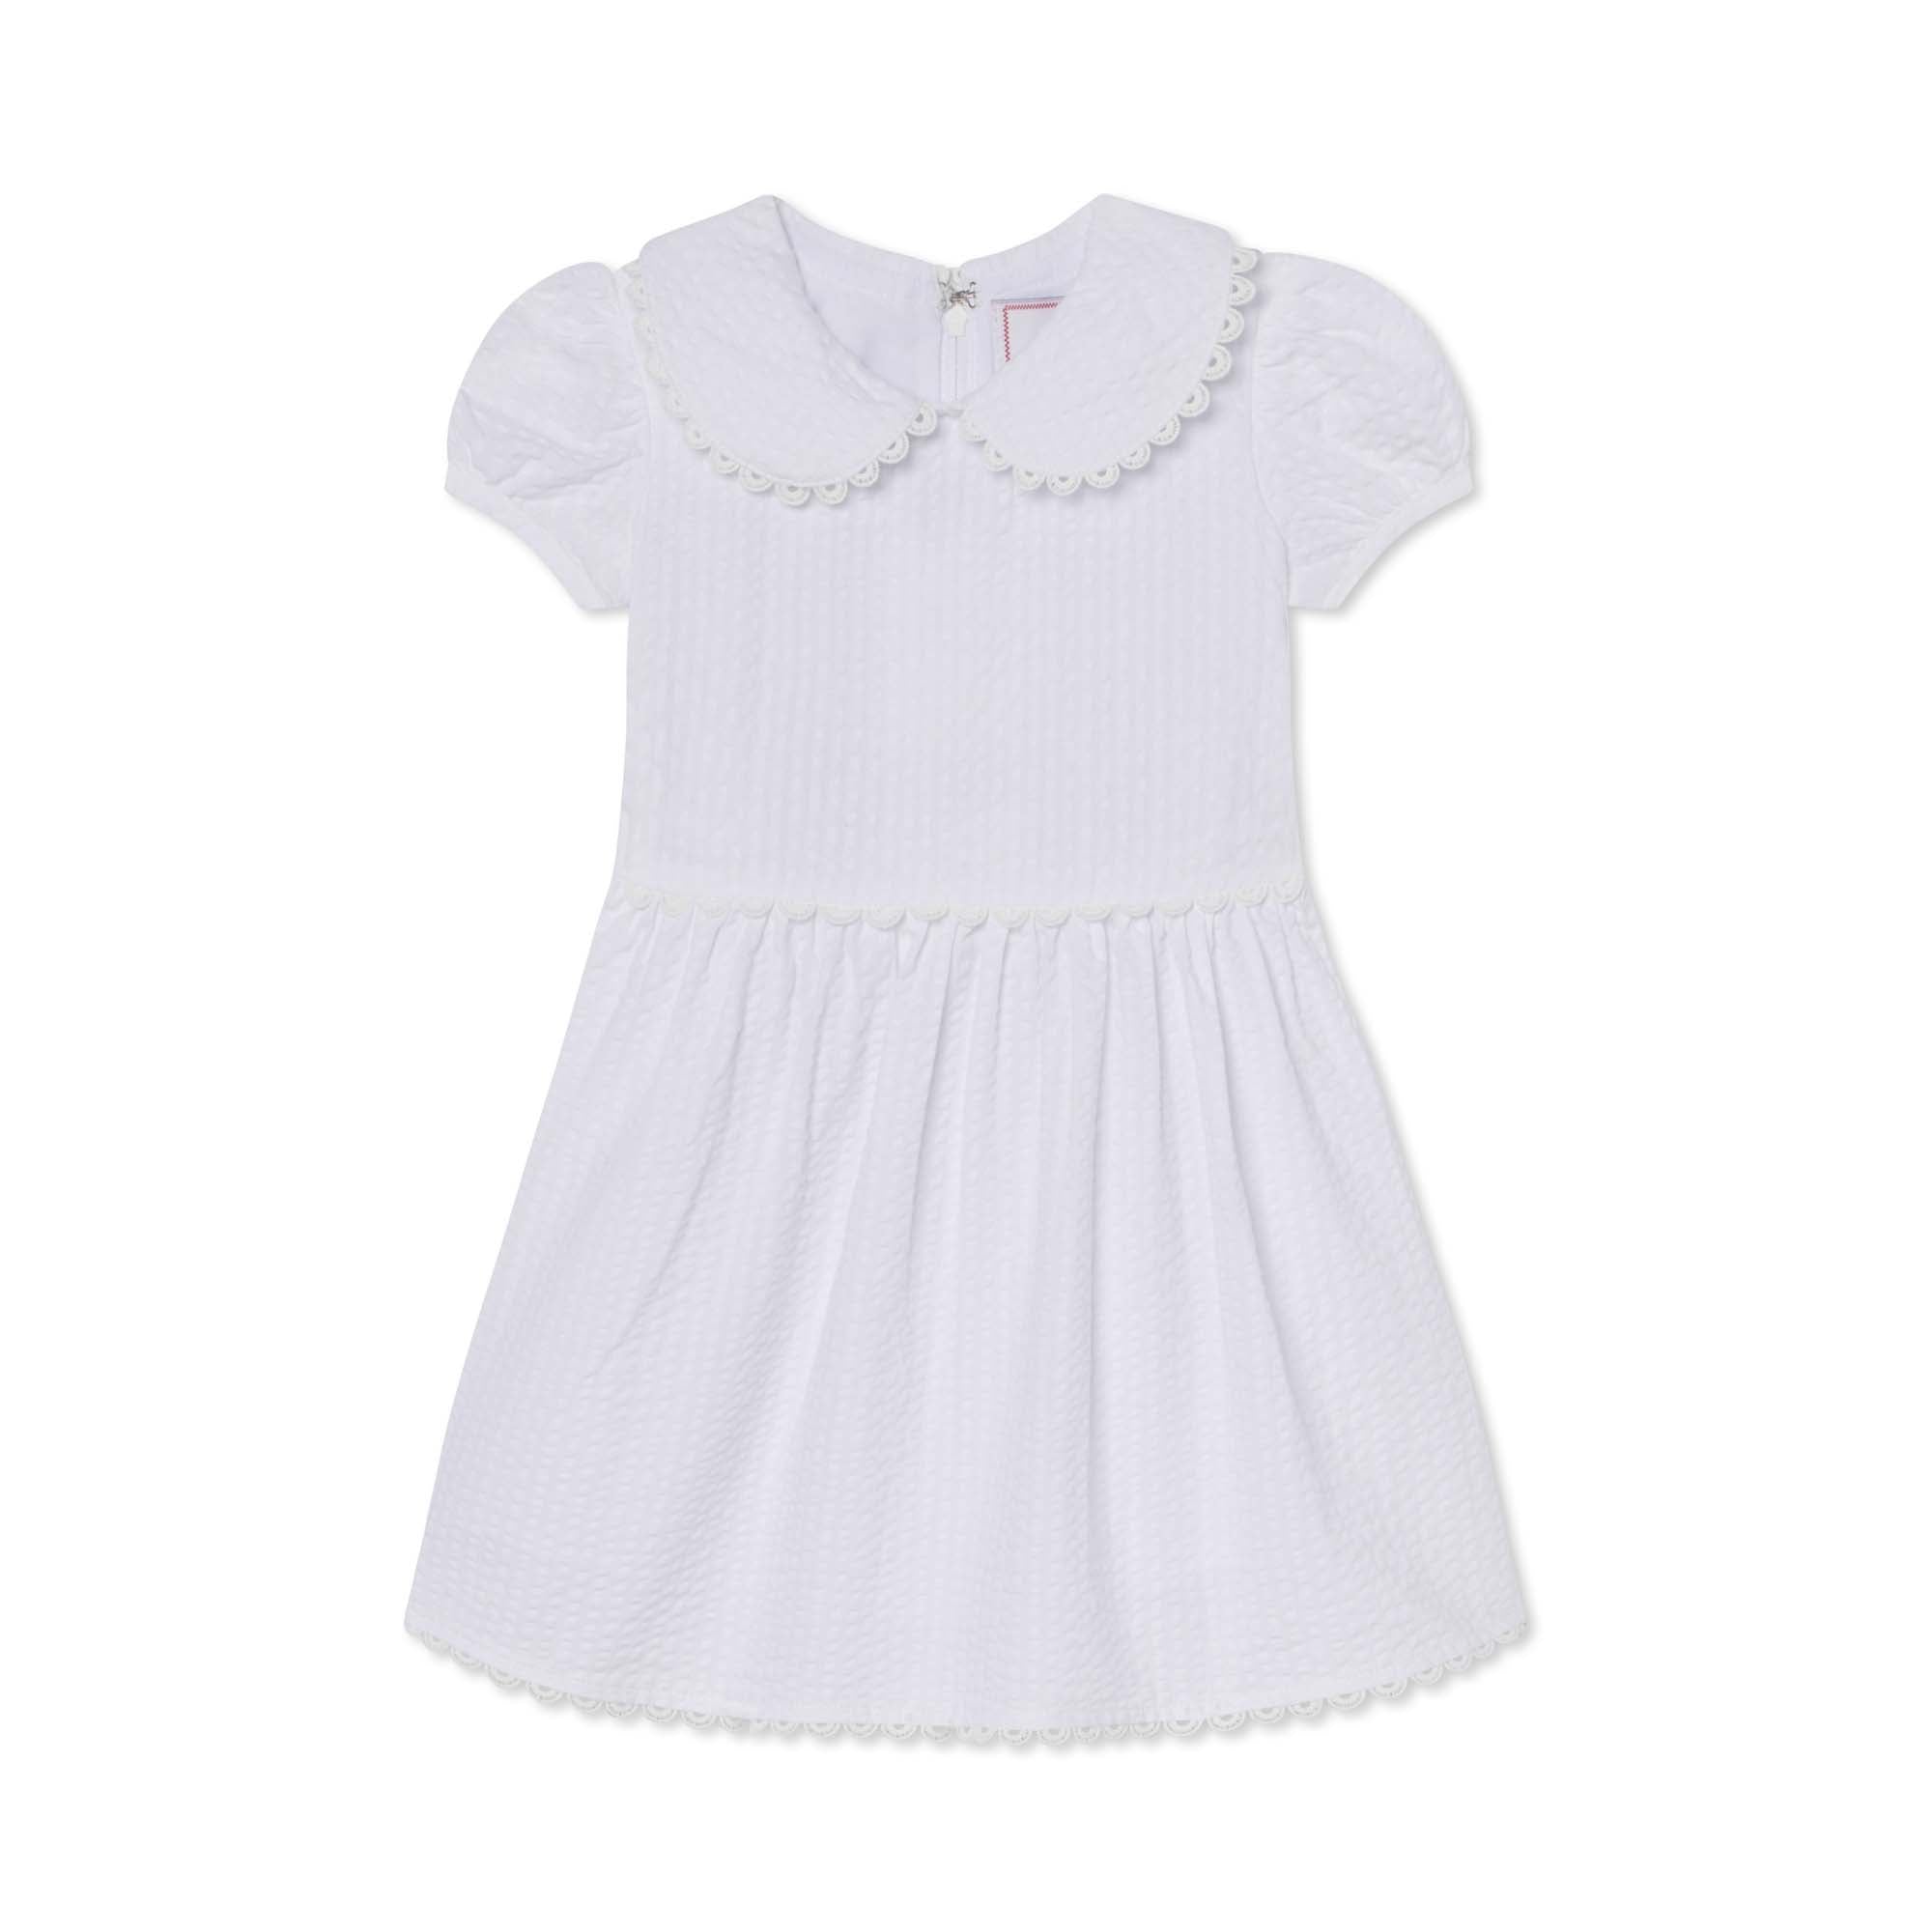 Classic and Preppy Hazel Dress, White Seersucker-Dresses, Jumpsuits and Rompers-Bright White on Bright White Seersucker-3-6M-CPC - Classic Prep Childrenswear